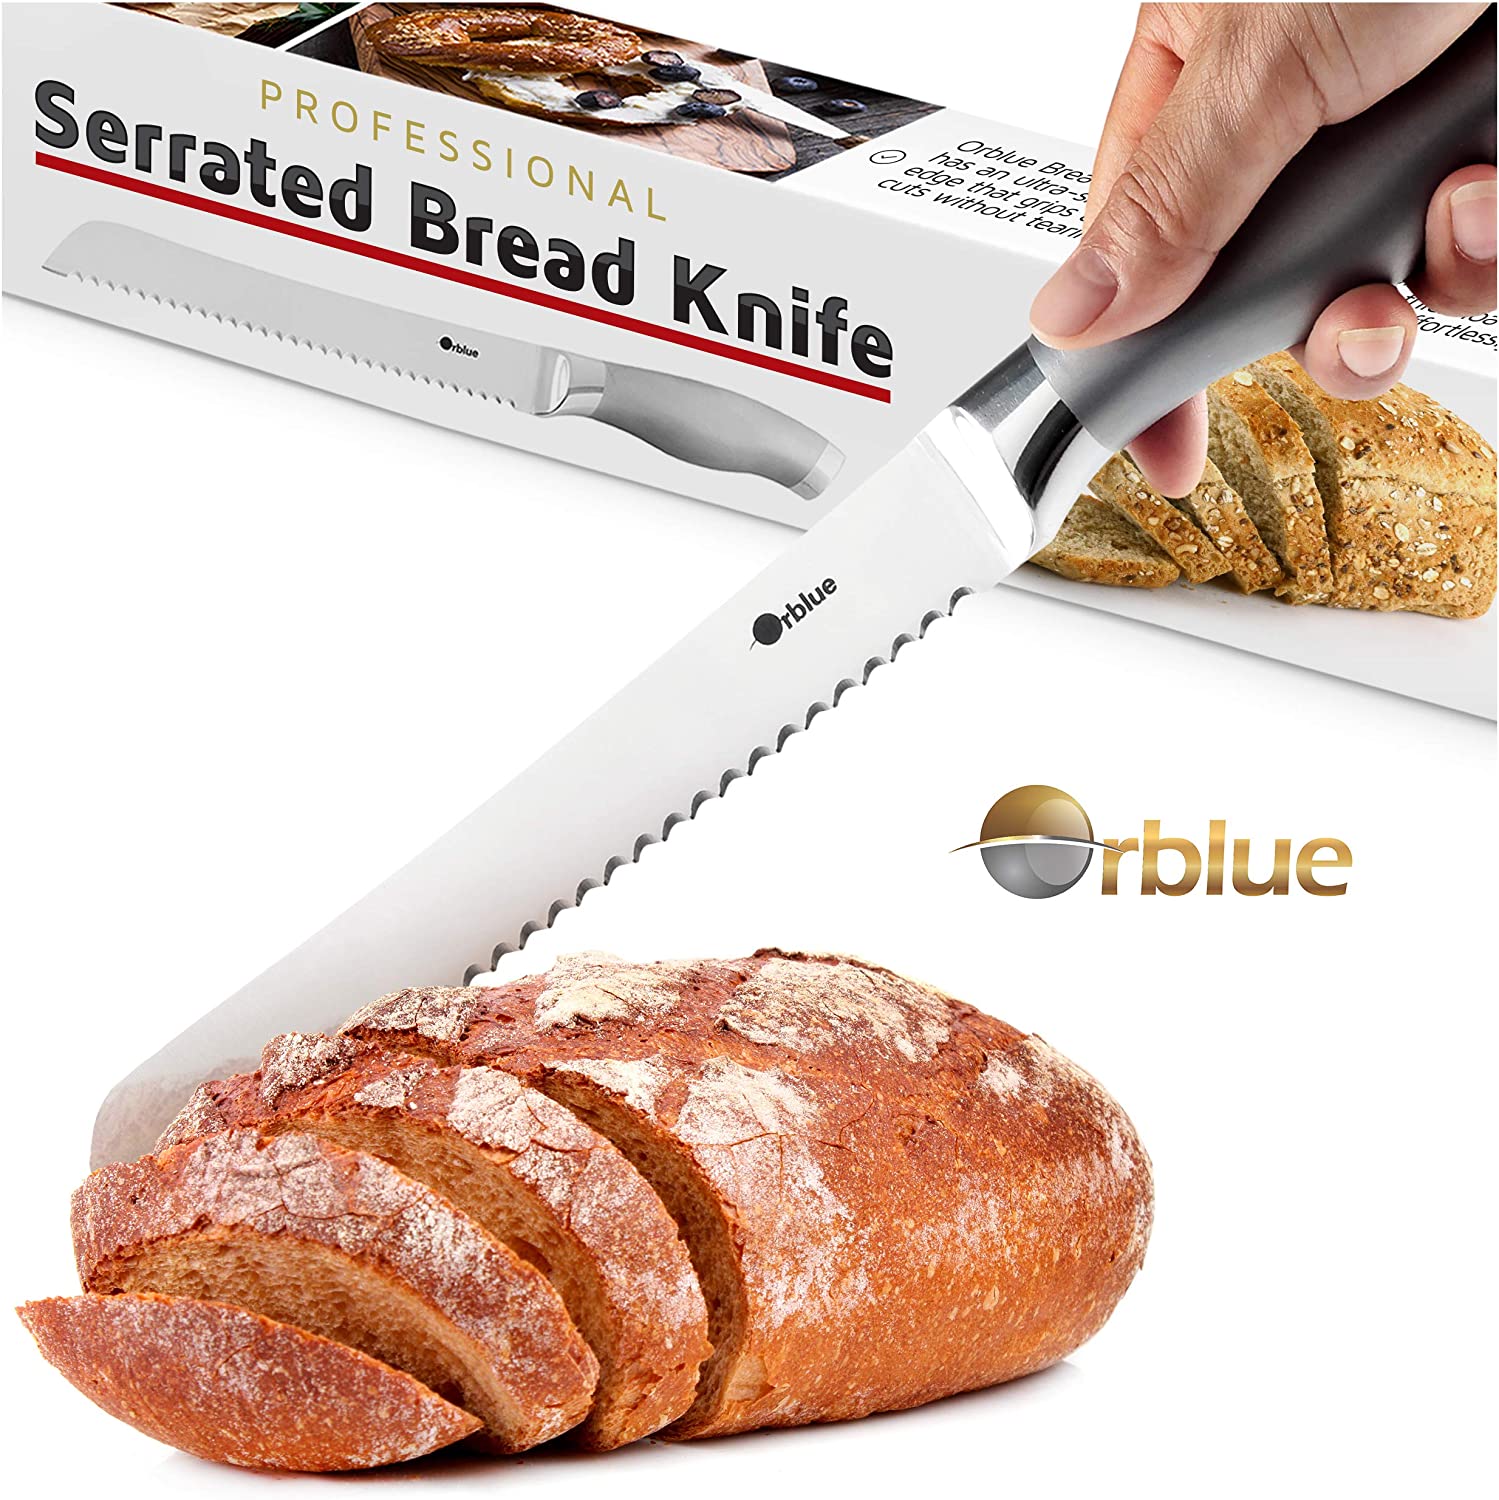 Stainless Steel Bread Knife From Orblue 